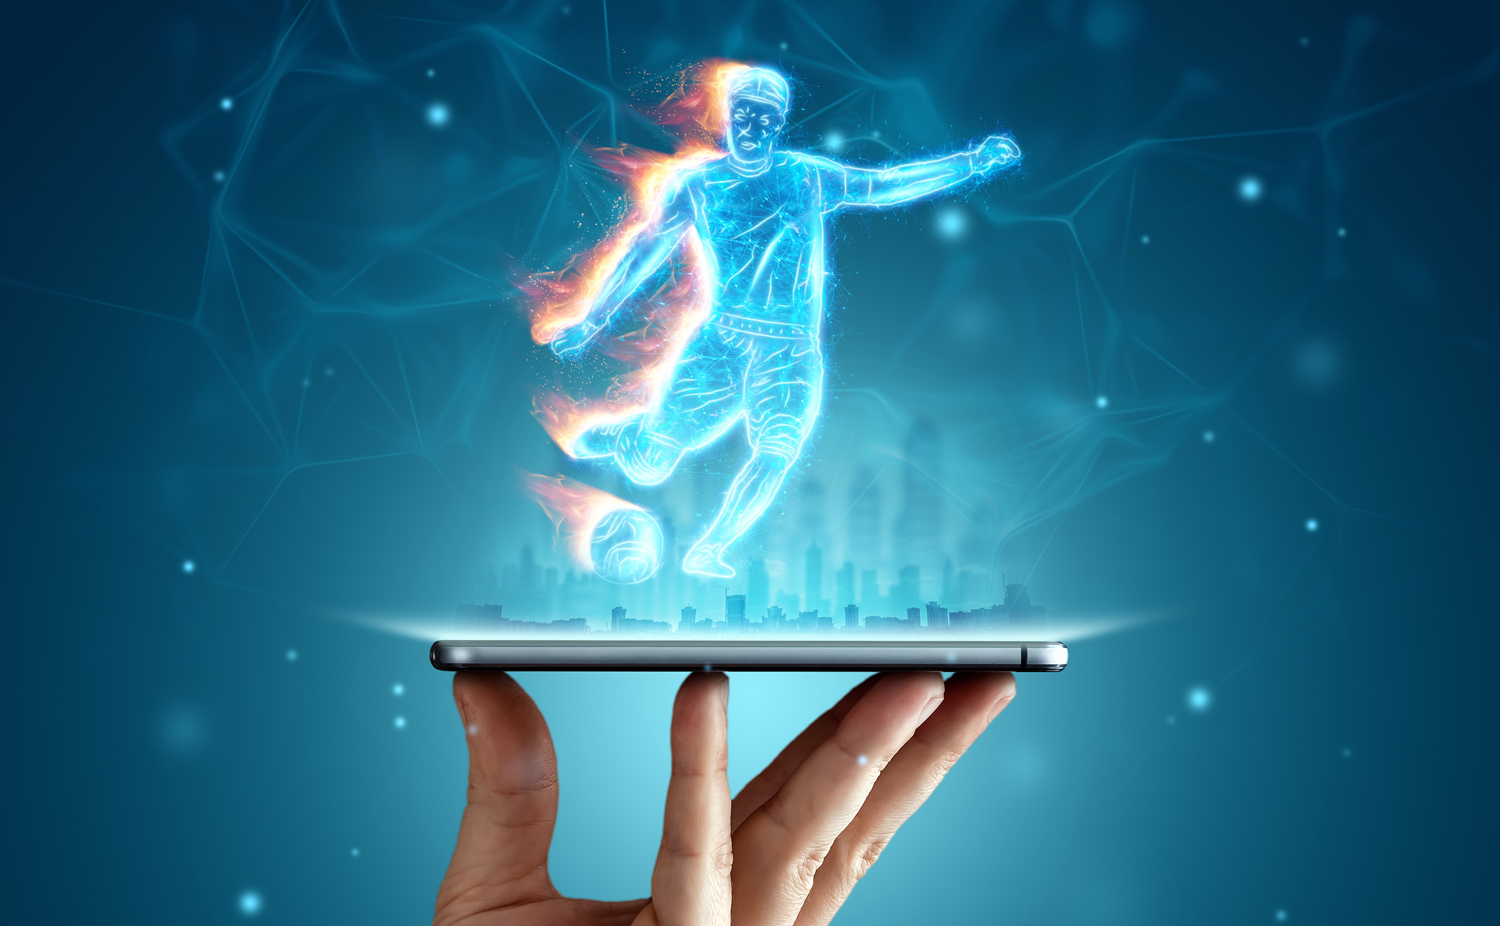 A hologram soccer player runs out of a smartphone screen.